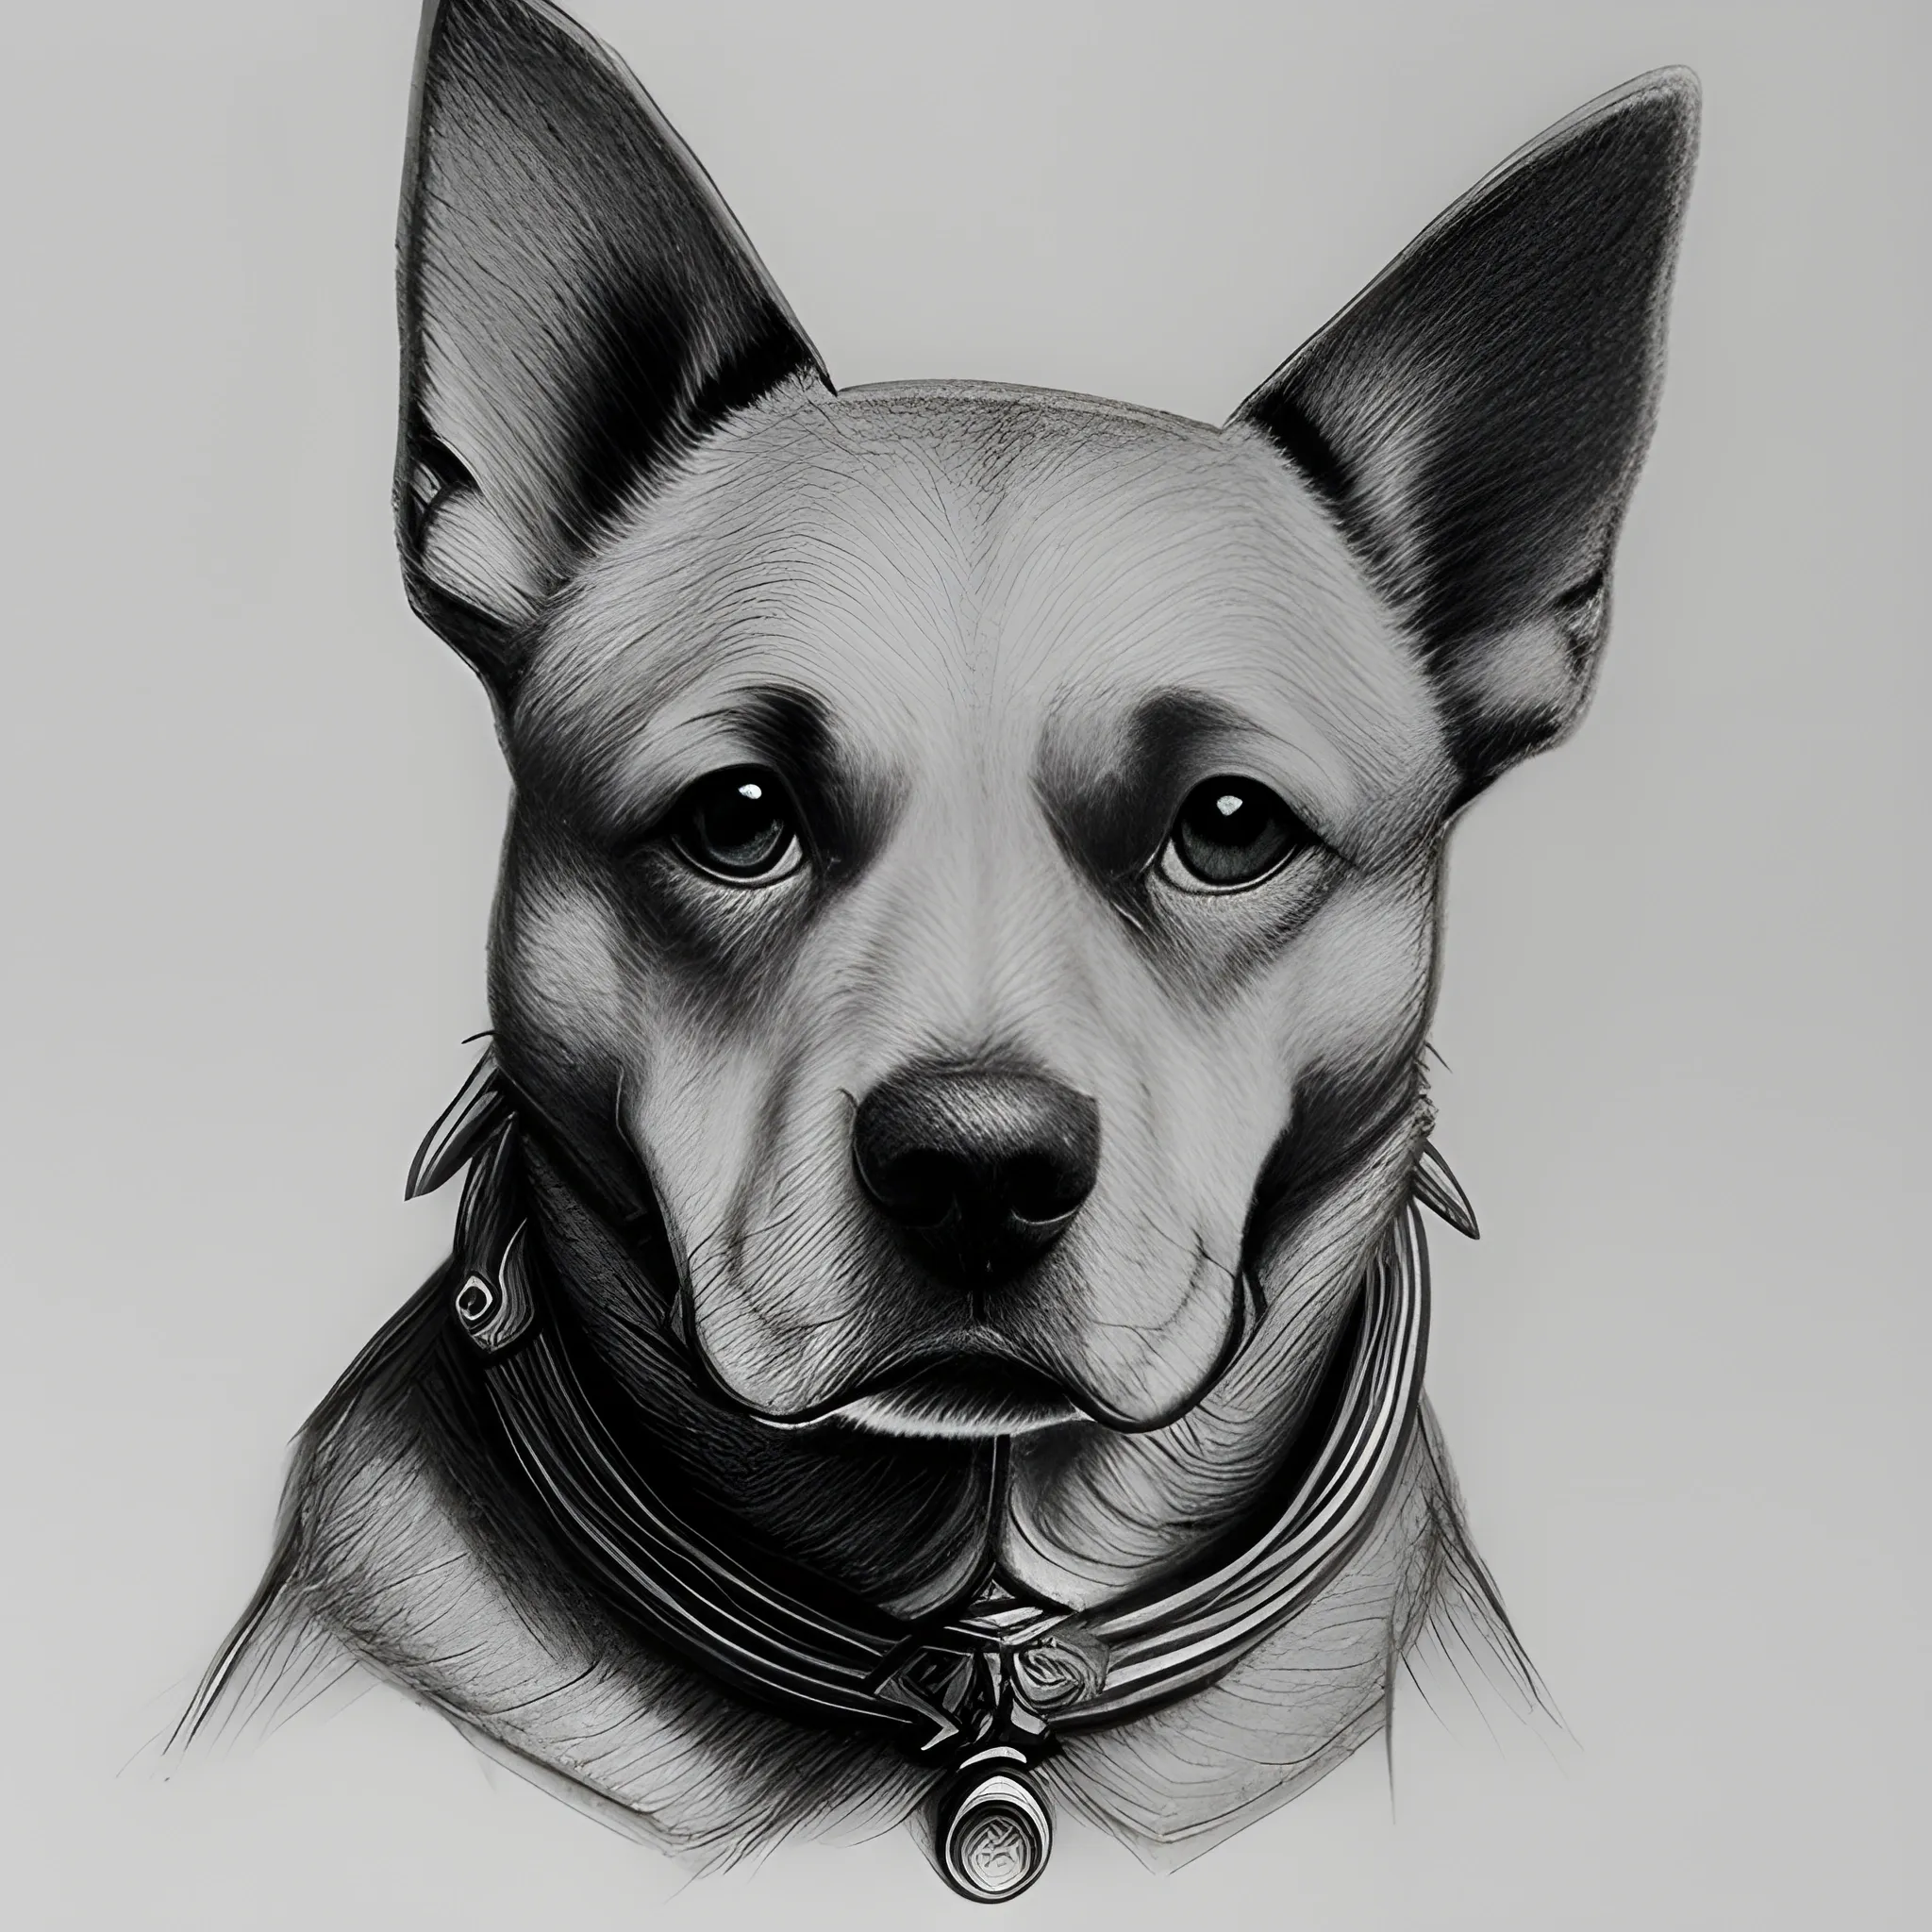 Realistic Pencil Drawing of a Cute Puppy